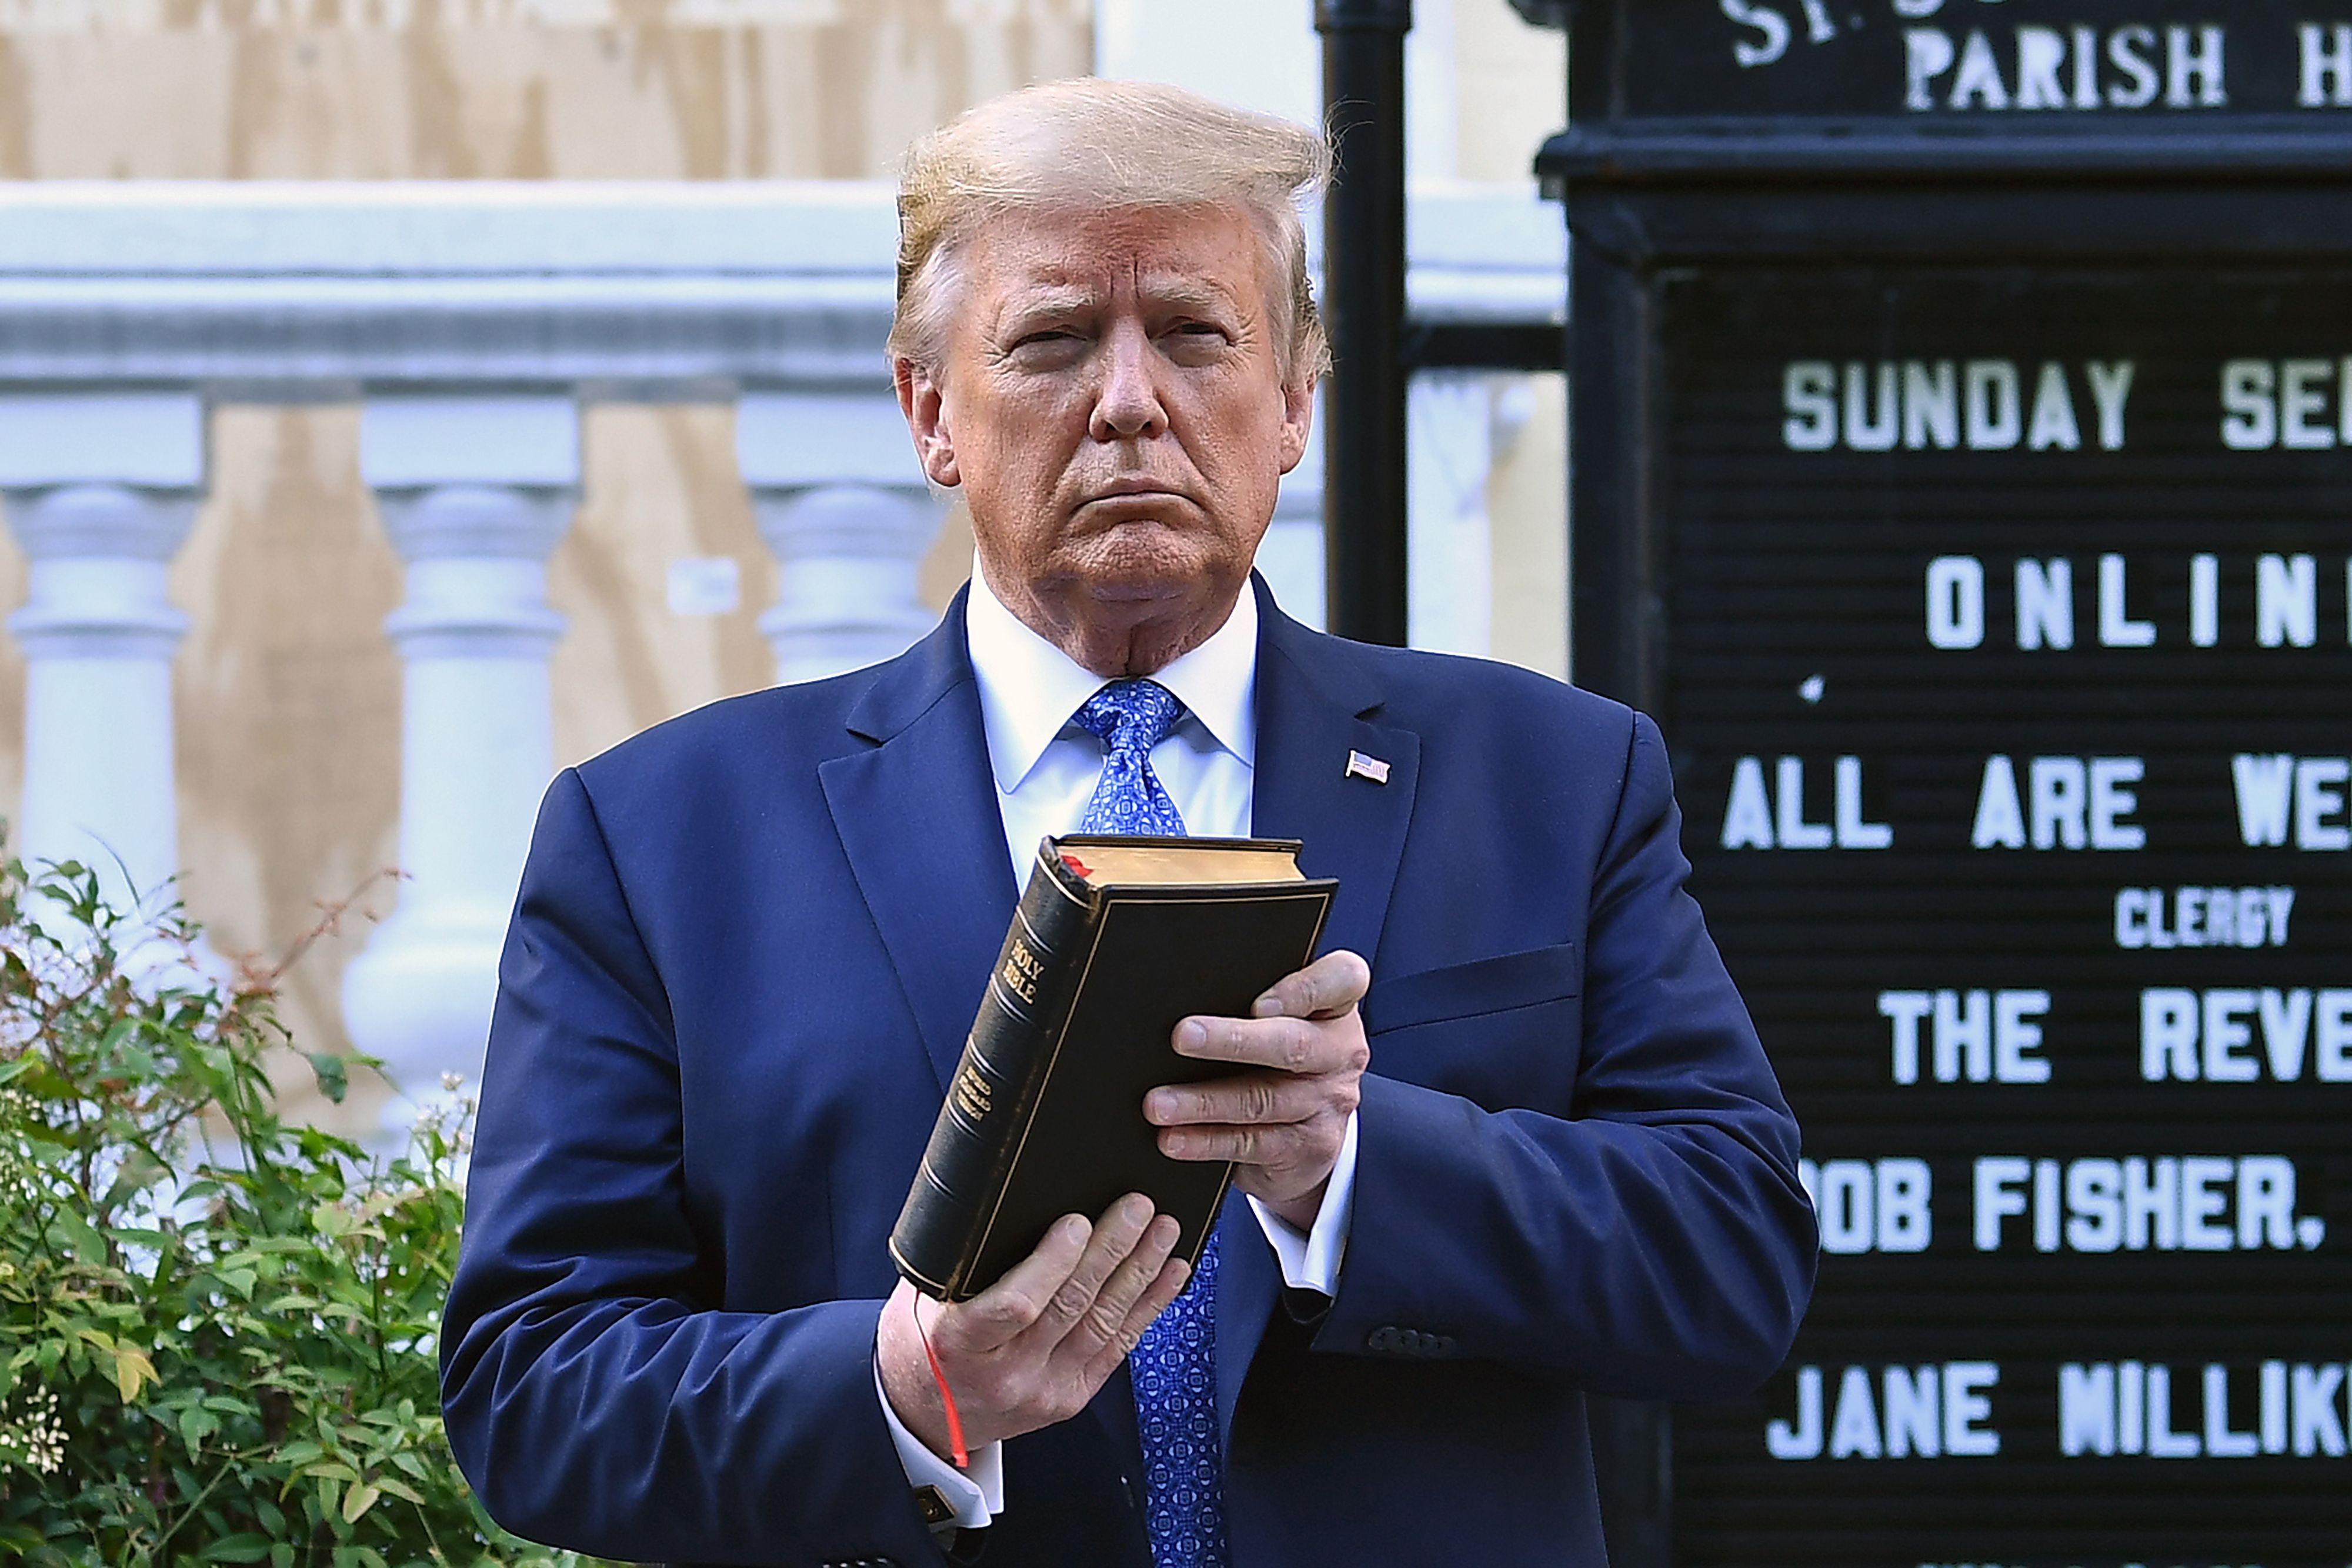 Trump holds up a Bible outside of St John's Episcopal church.